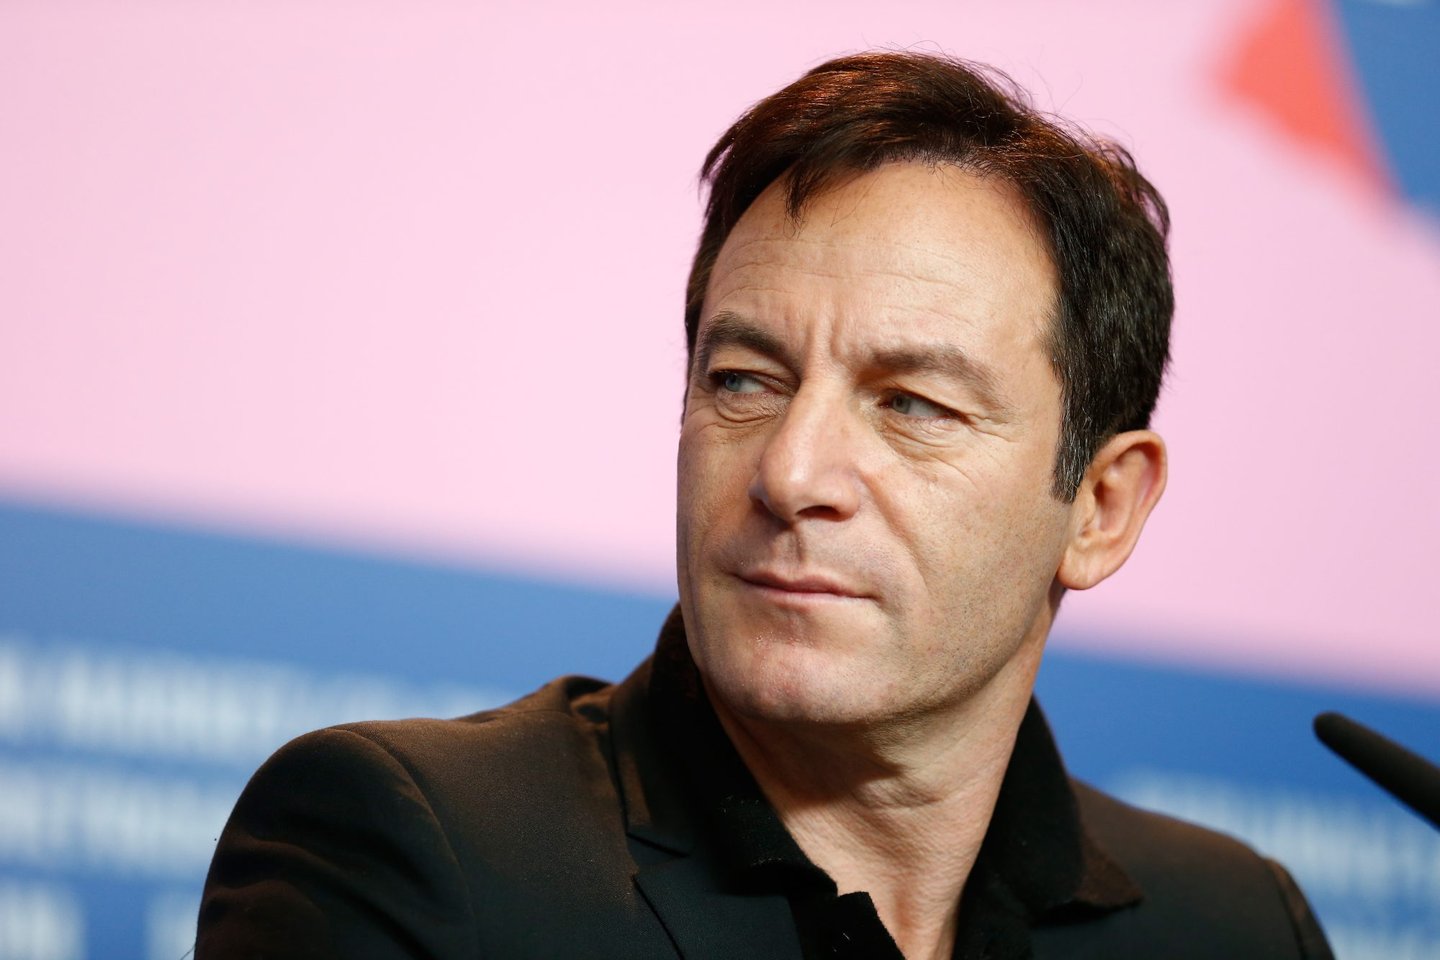 BERLIN, GERMANY - FEBRUARY 09: Jason Isaacs attends the 'Things People Do' press conference during 64th Berlinale International Film Festival at Grand Hyatt Hotel on February 9, 2014 in Berlin, Germany. (Photo by Andreas Rentz/Getty Images)